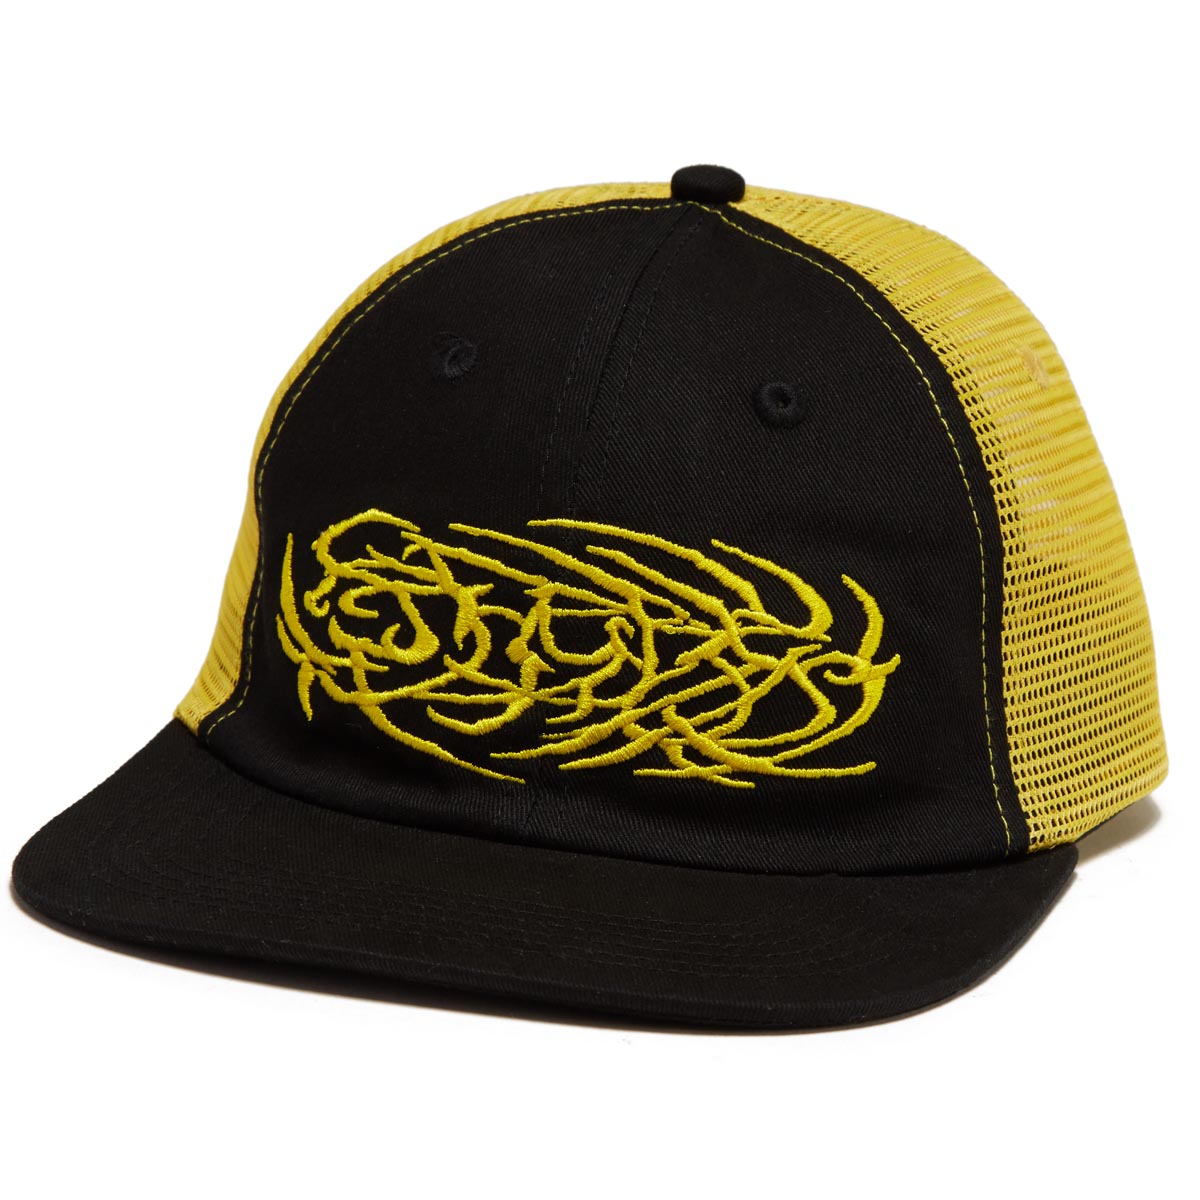 There Chainsaw Snapback Hat - Black/Yellow image 1